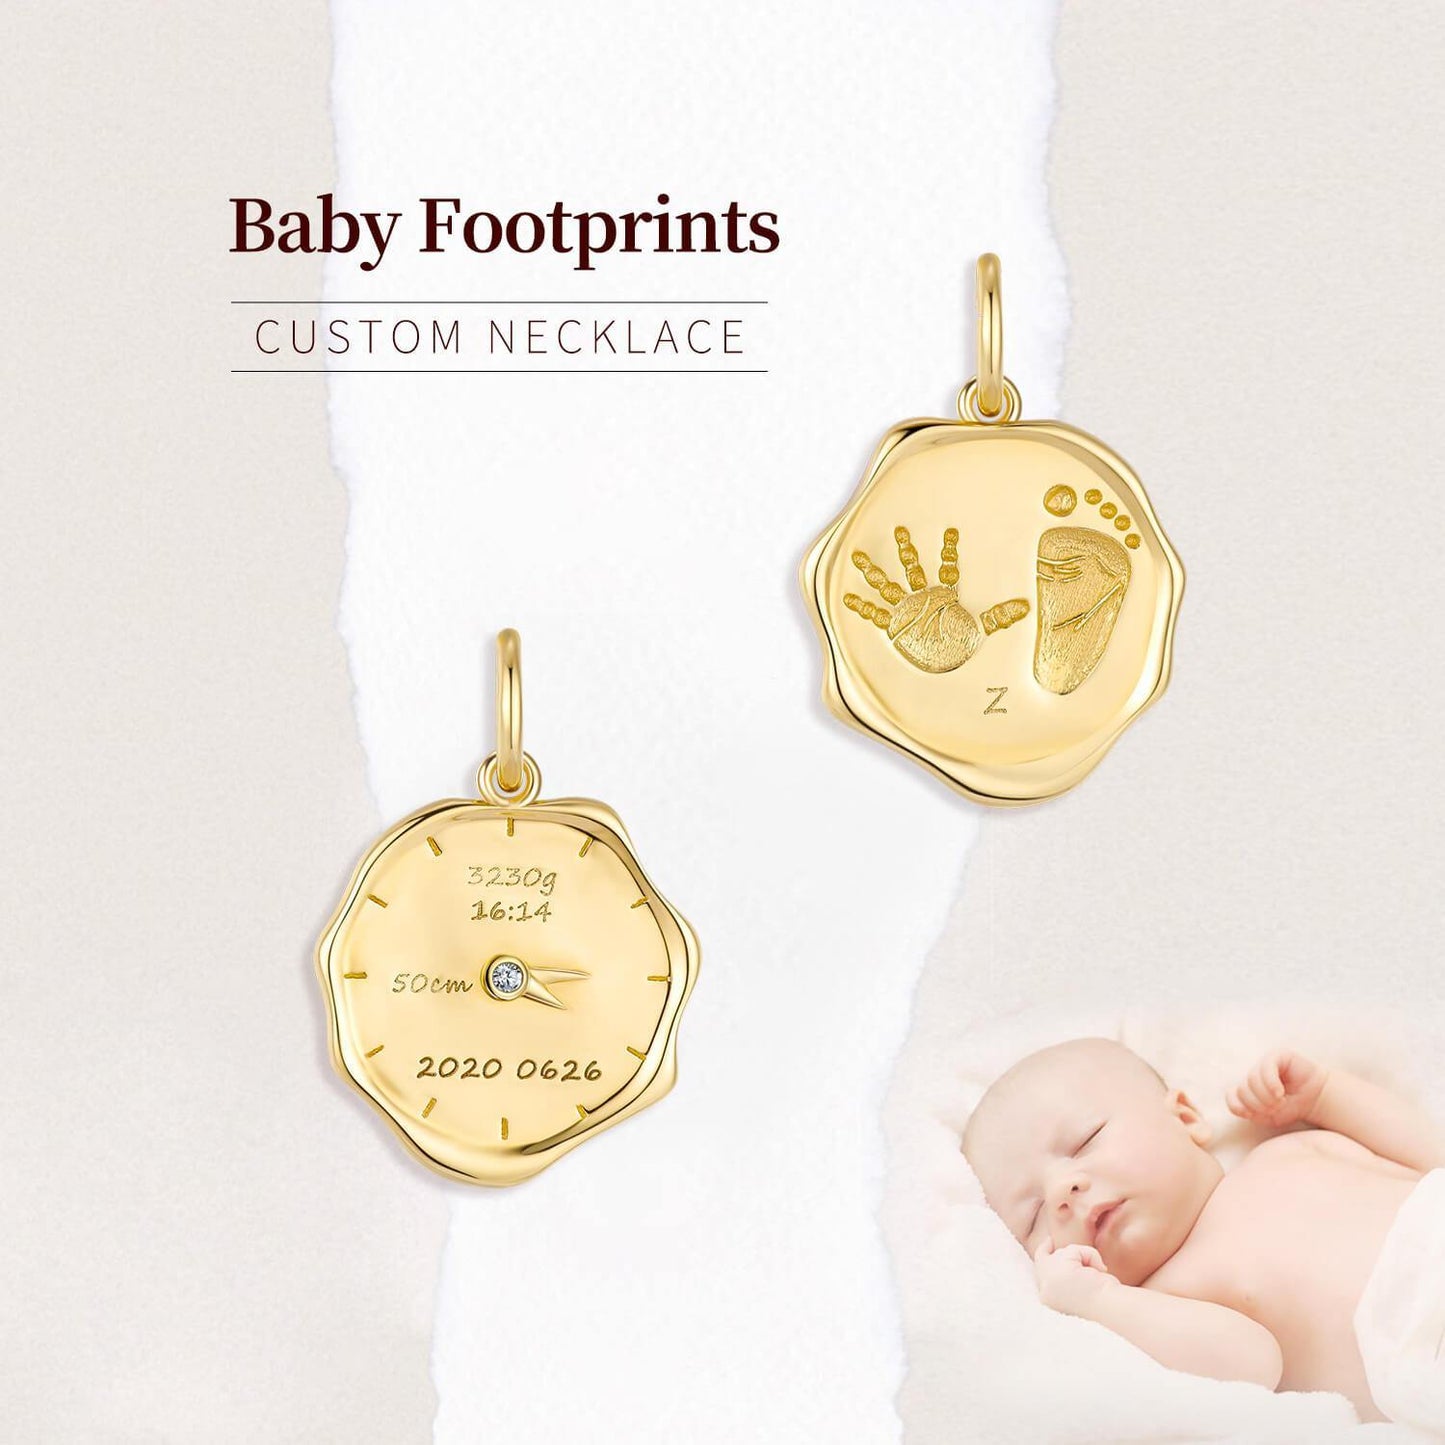 Baby and custom 18k gold baby footprints fire paint stamp necklace